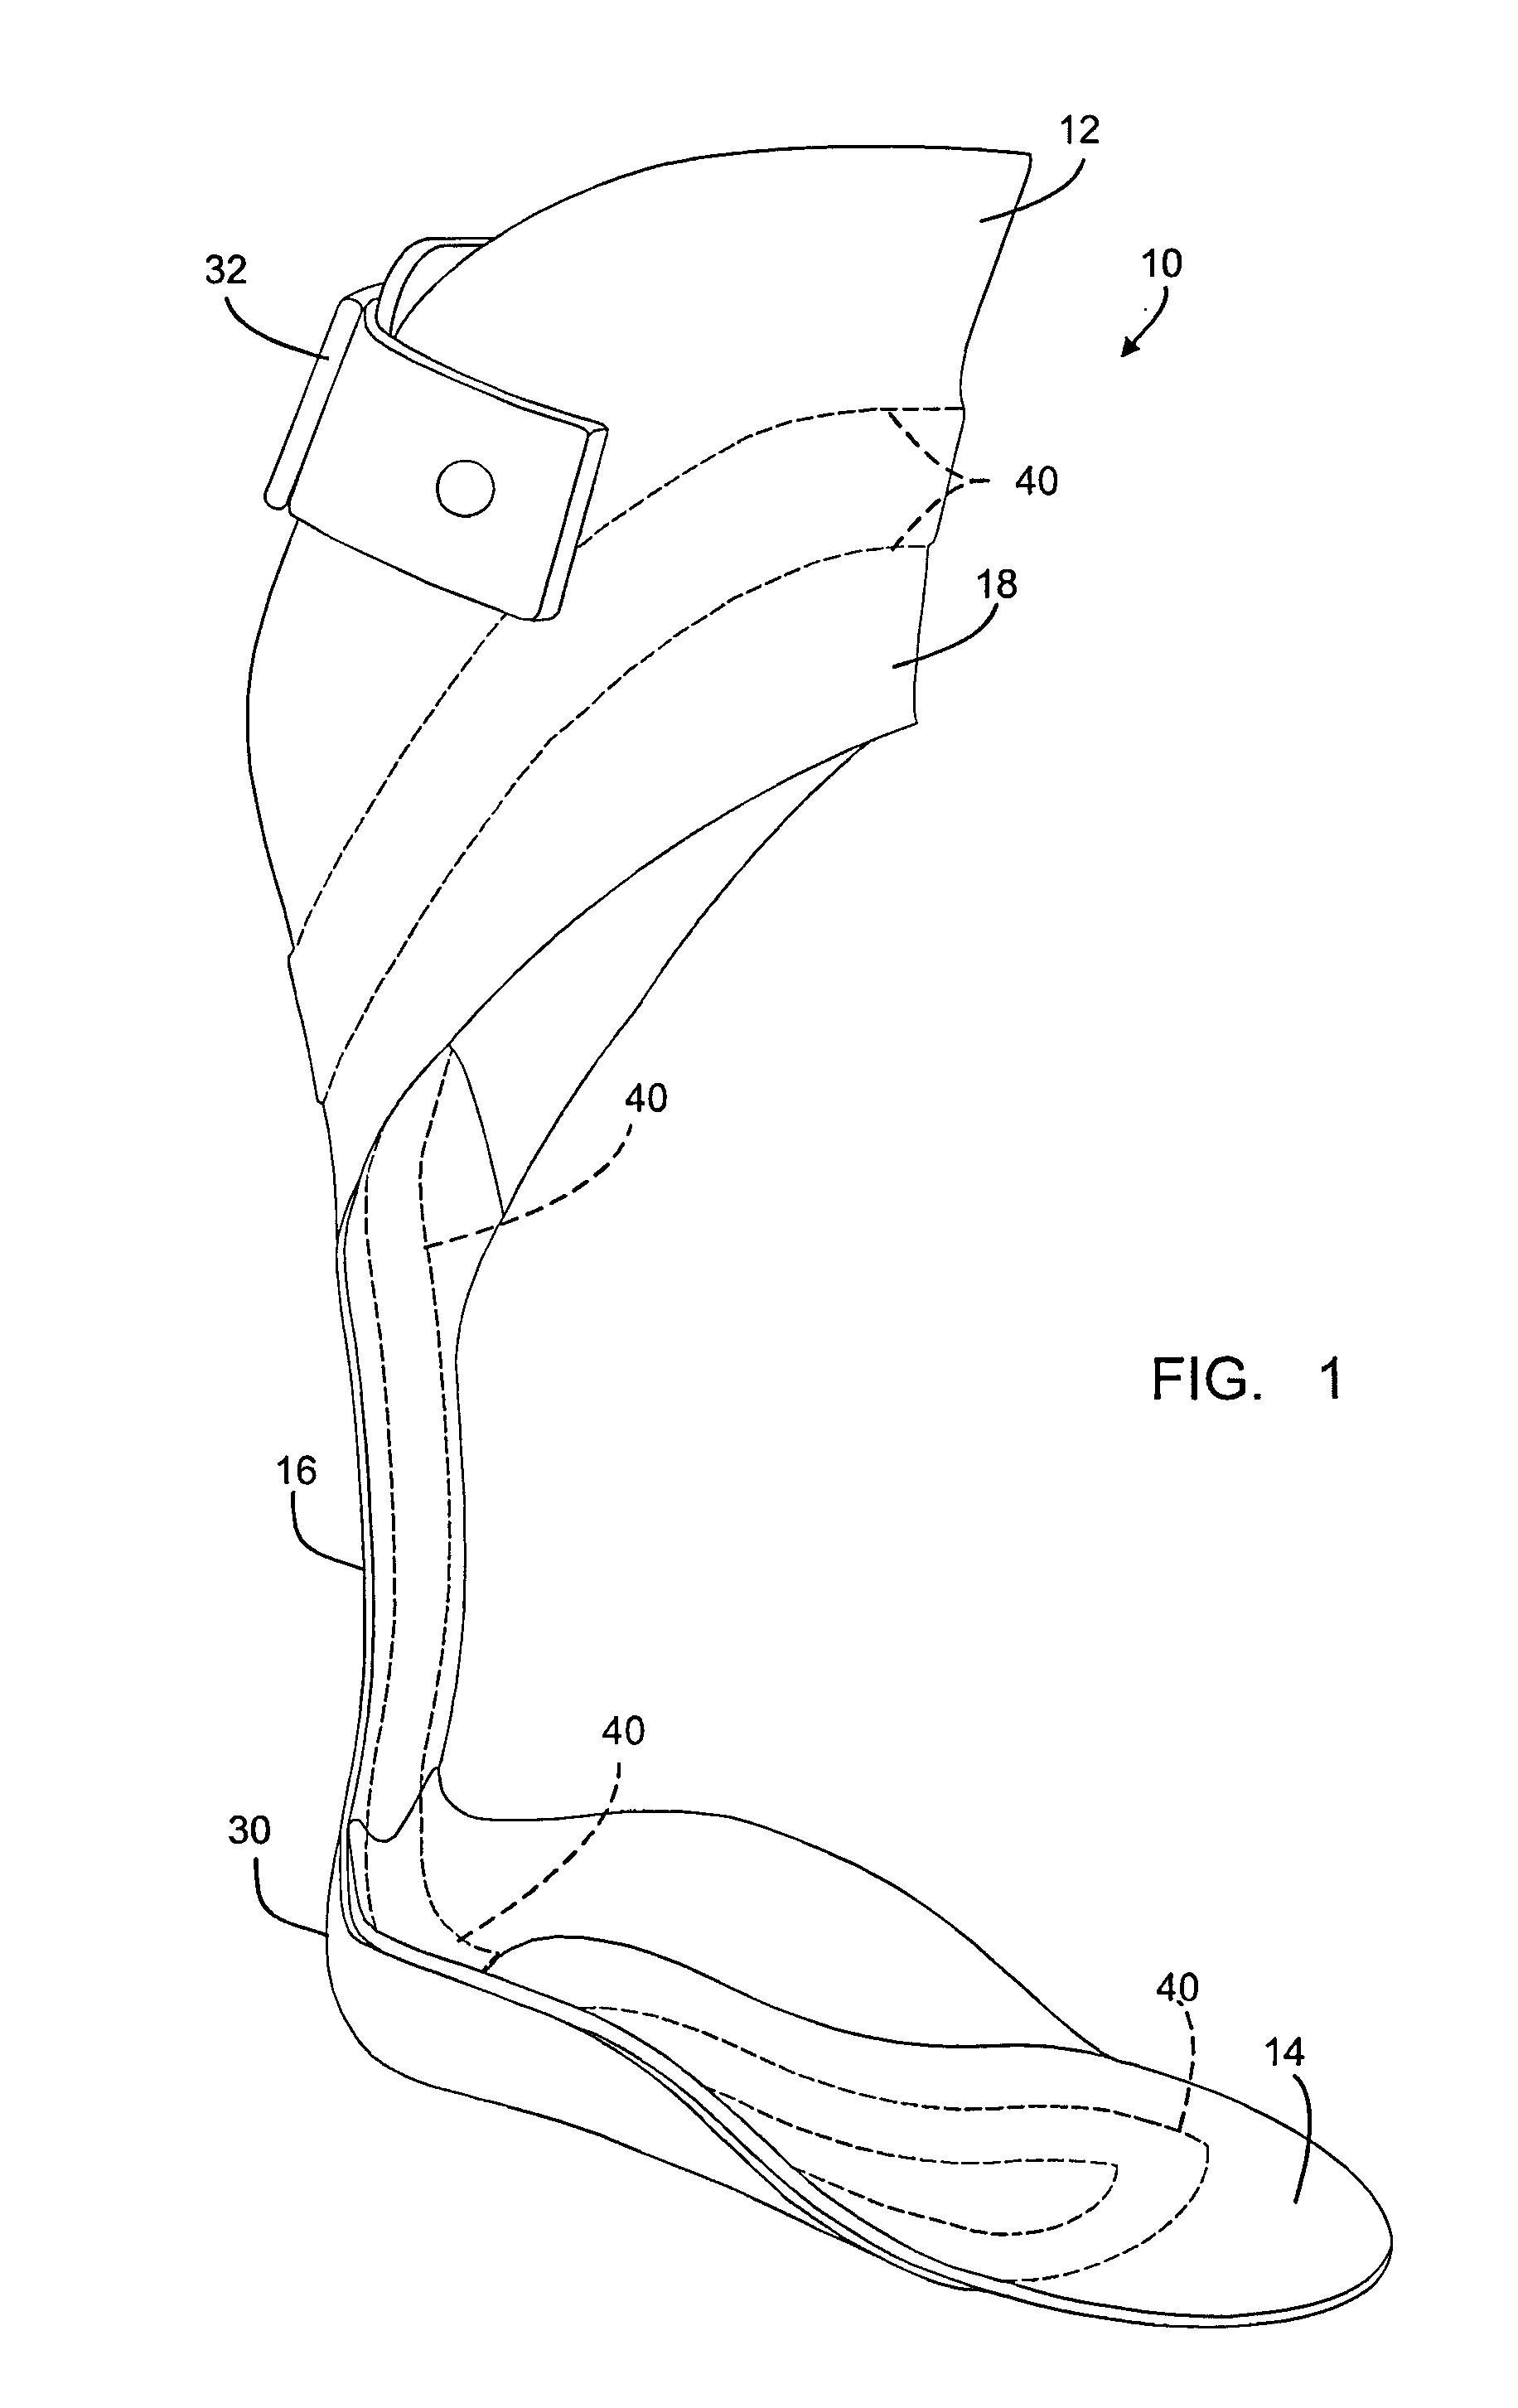 Carbon fiber orthosis and associated method